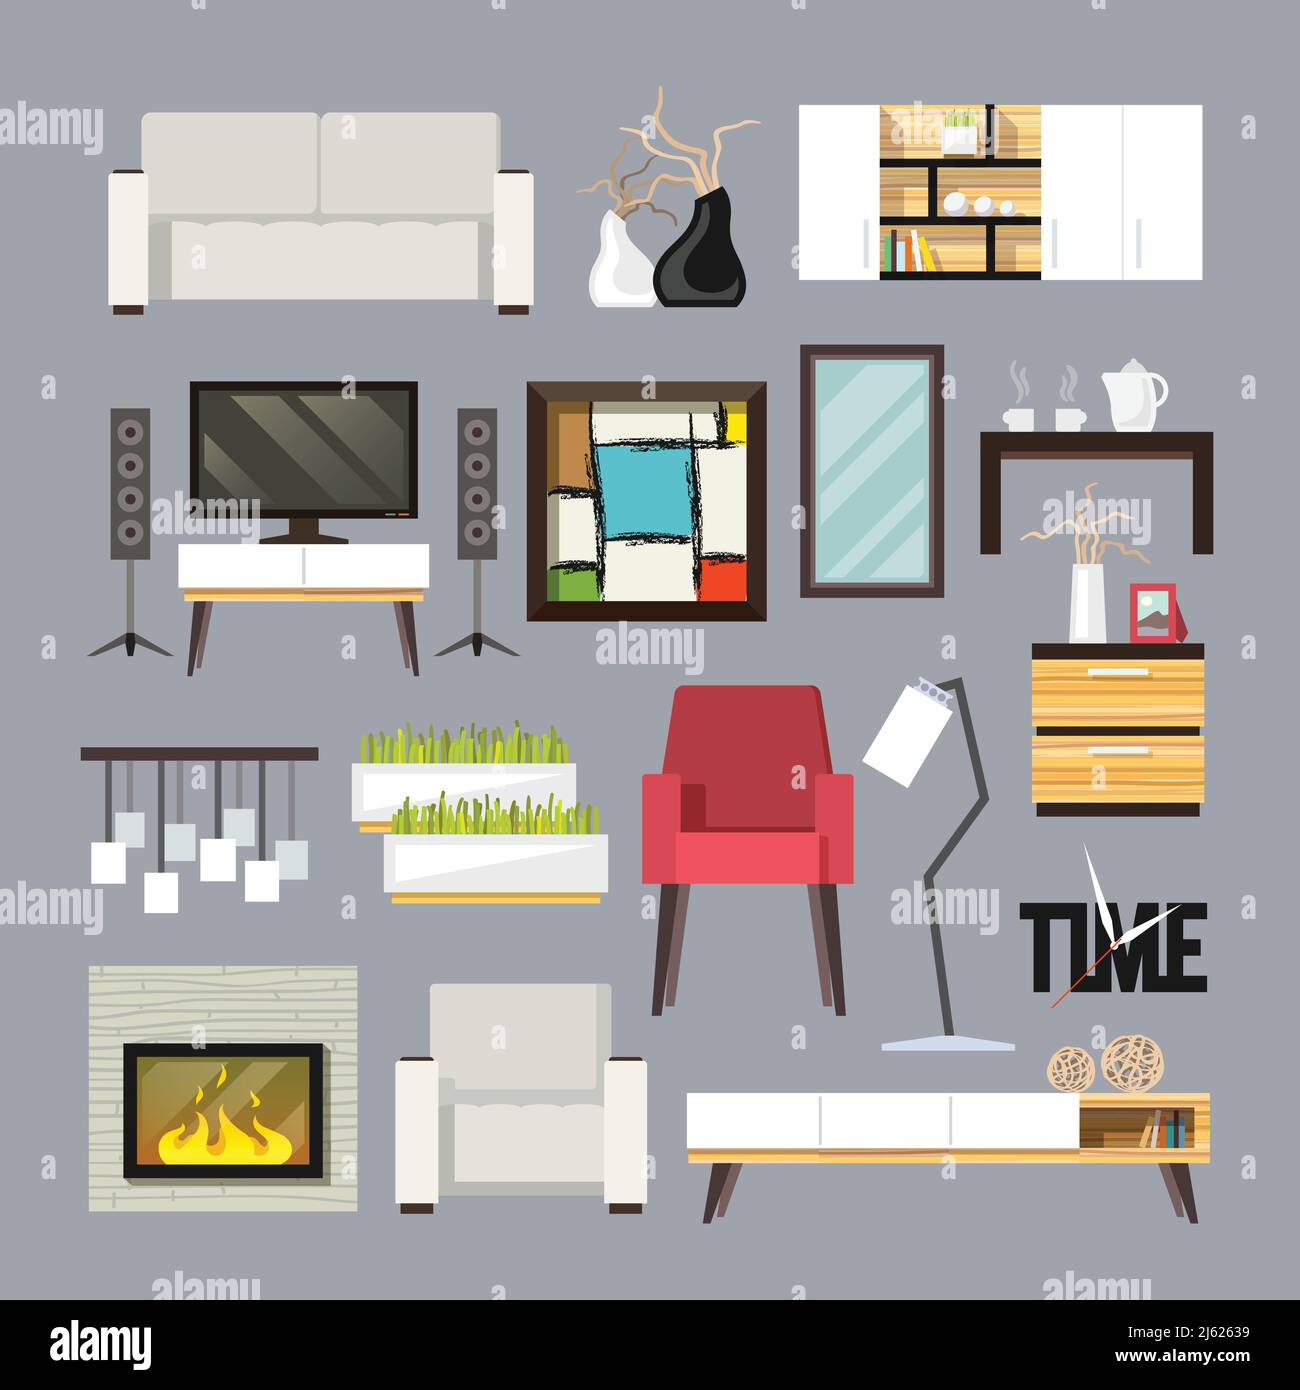 Living room furniture decorative icons set with sofa bookshelf tv table isolated vector illustration Stock Vector